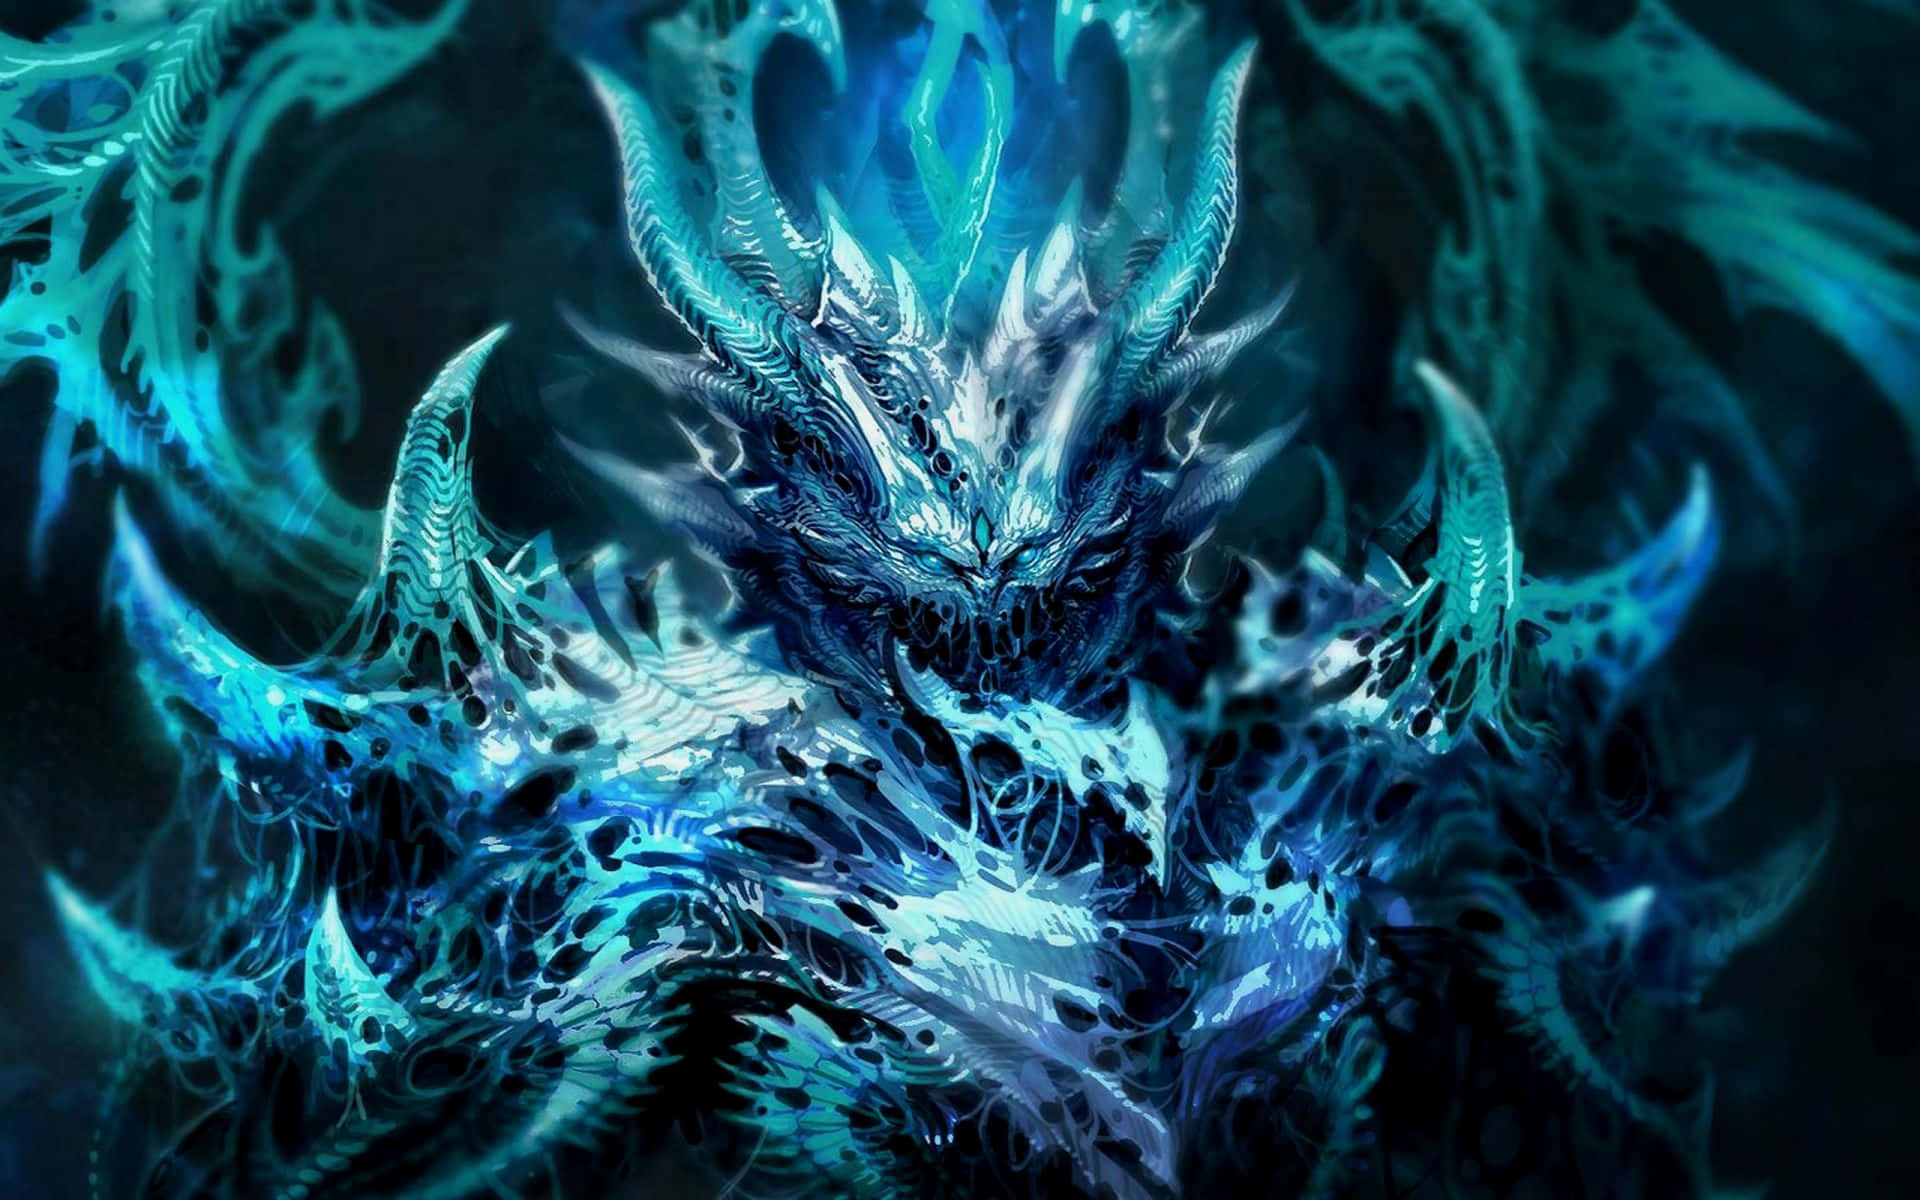 A Blue And White Ice Creature With A Sword